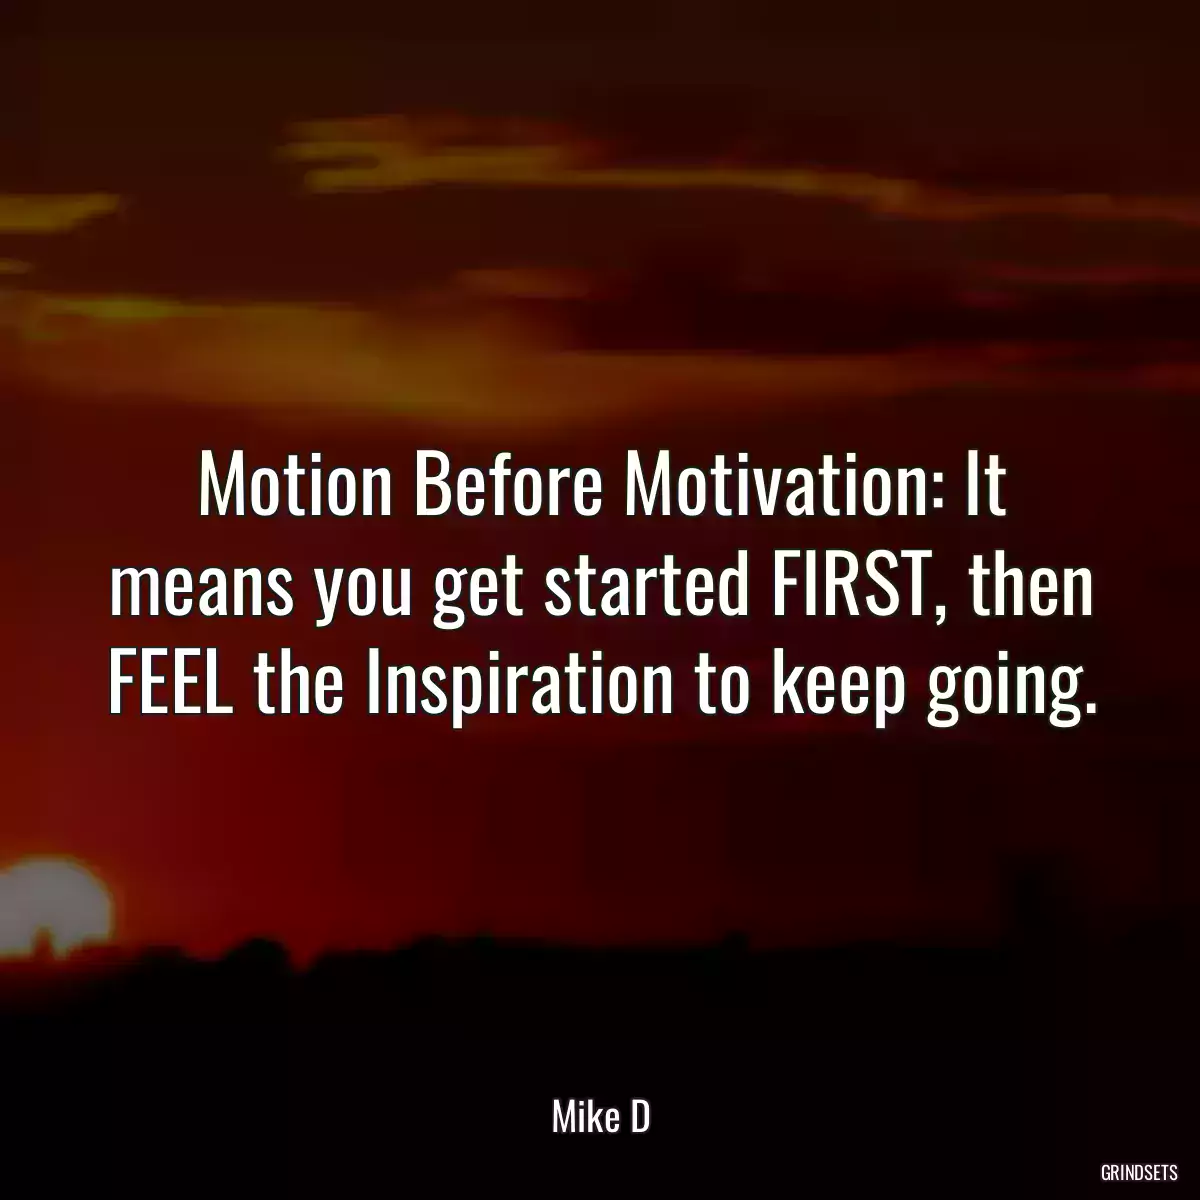 Motion Before Motivation: It means you get started FIRST, then FEEL the Inspiration to keep going.